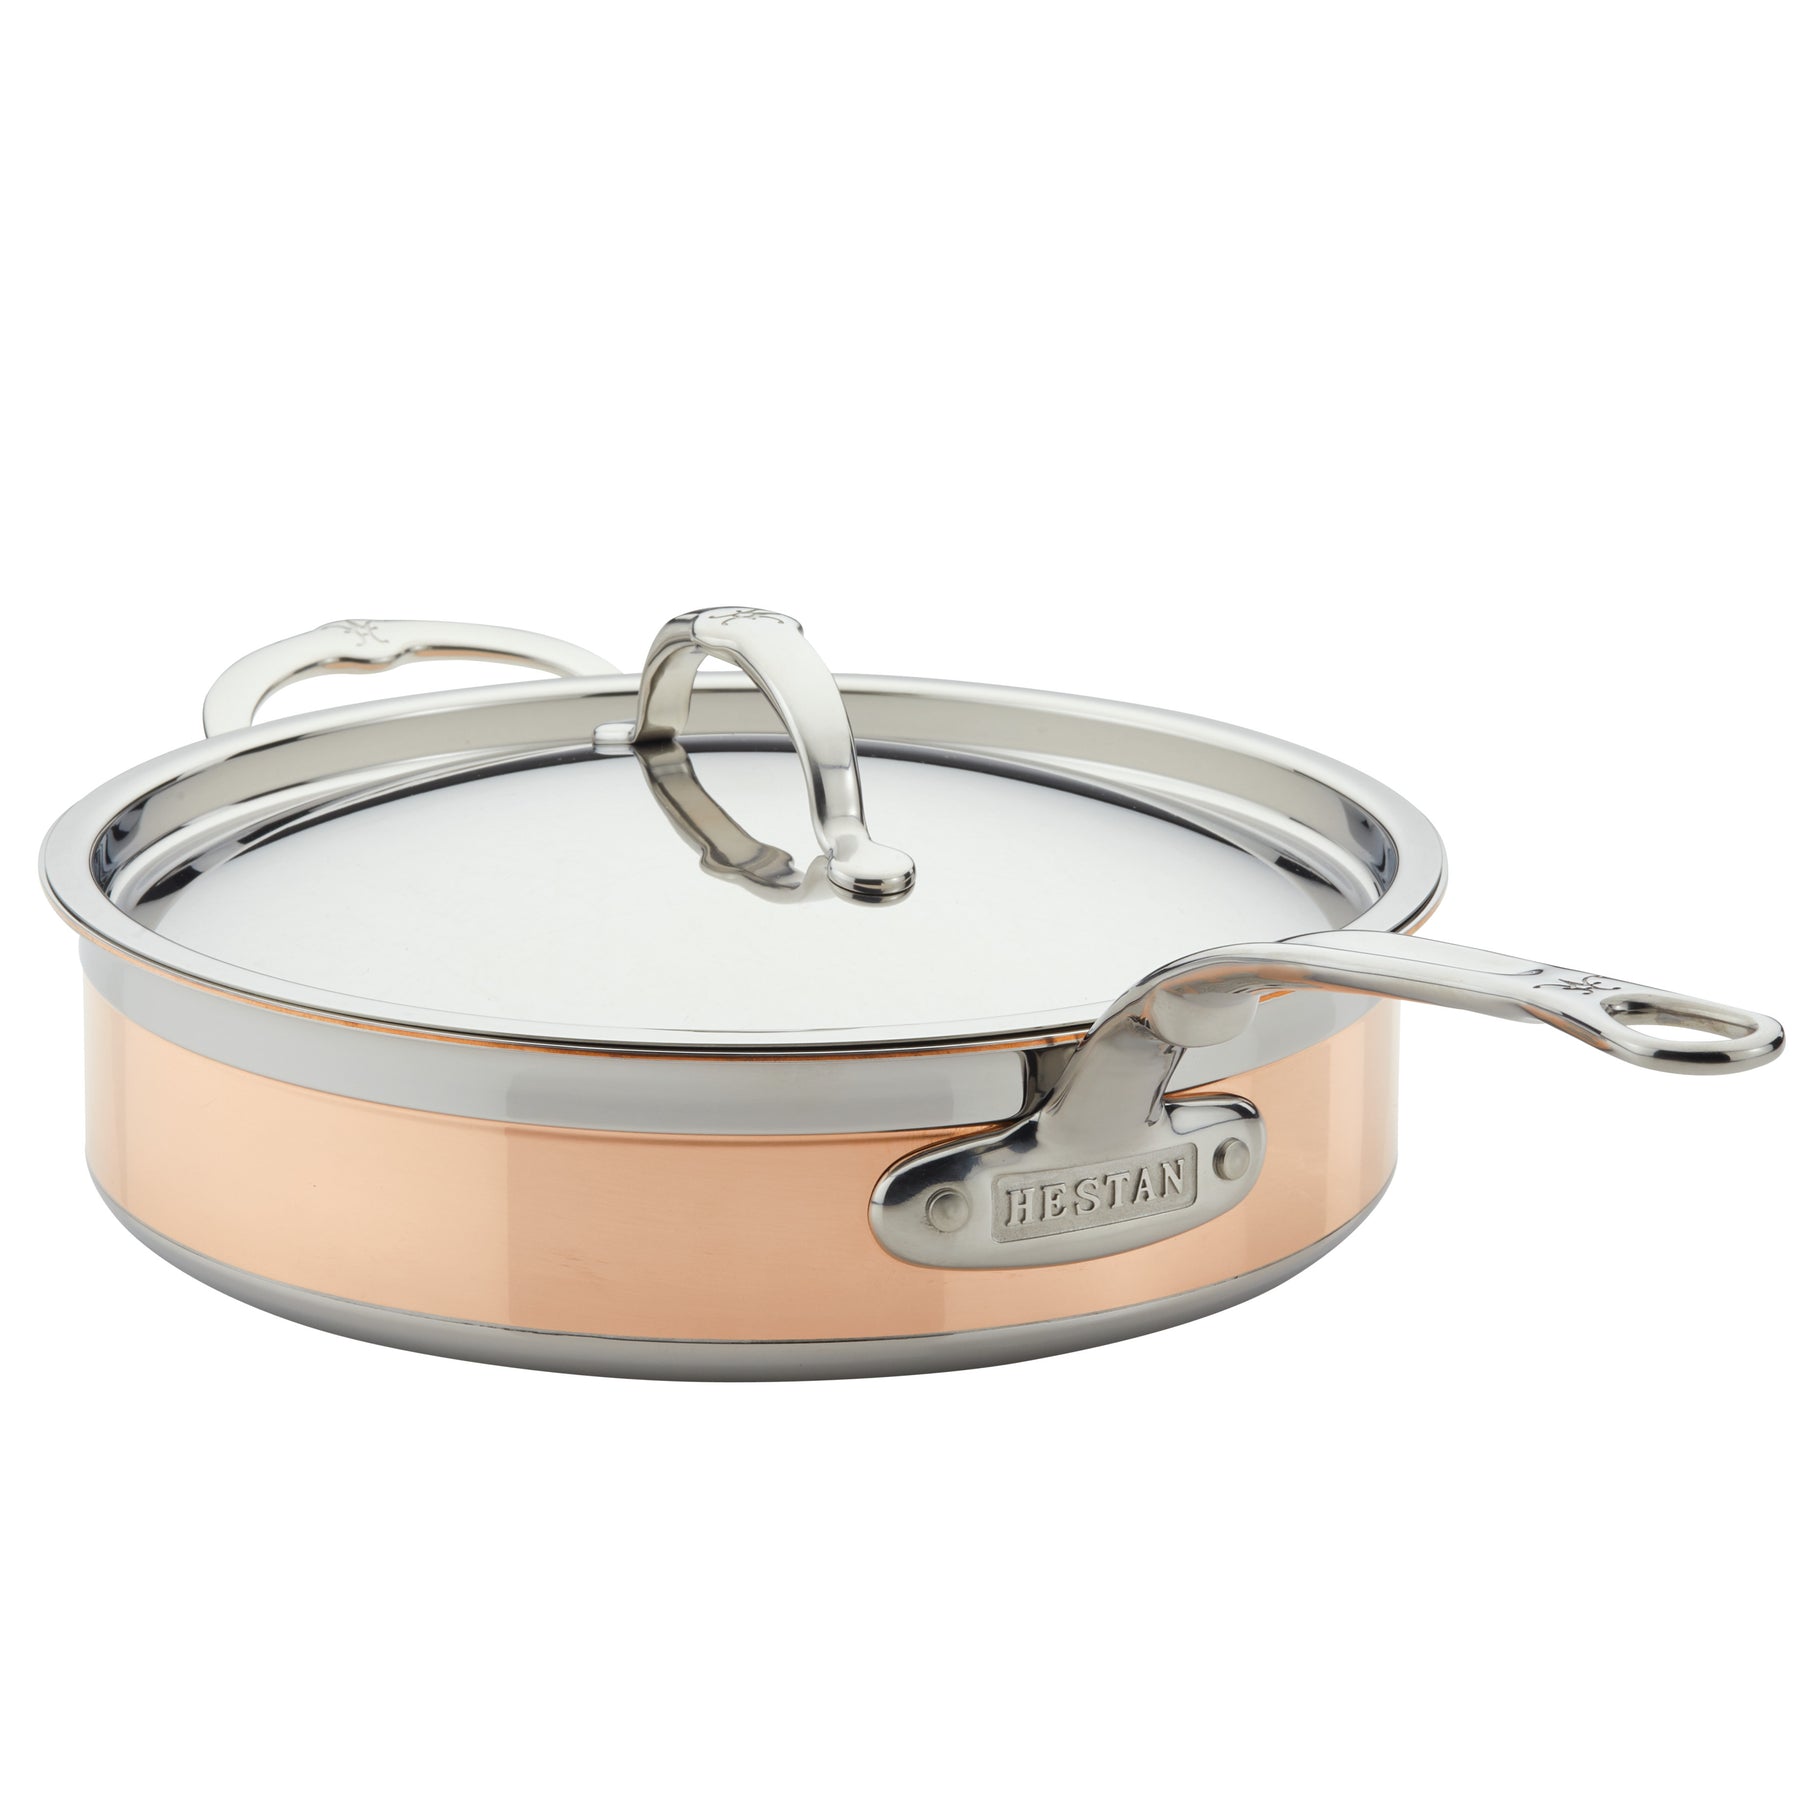 Copper Induction Skillets – Hestan Culinary